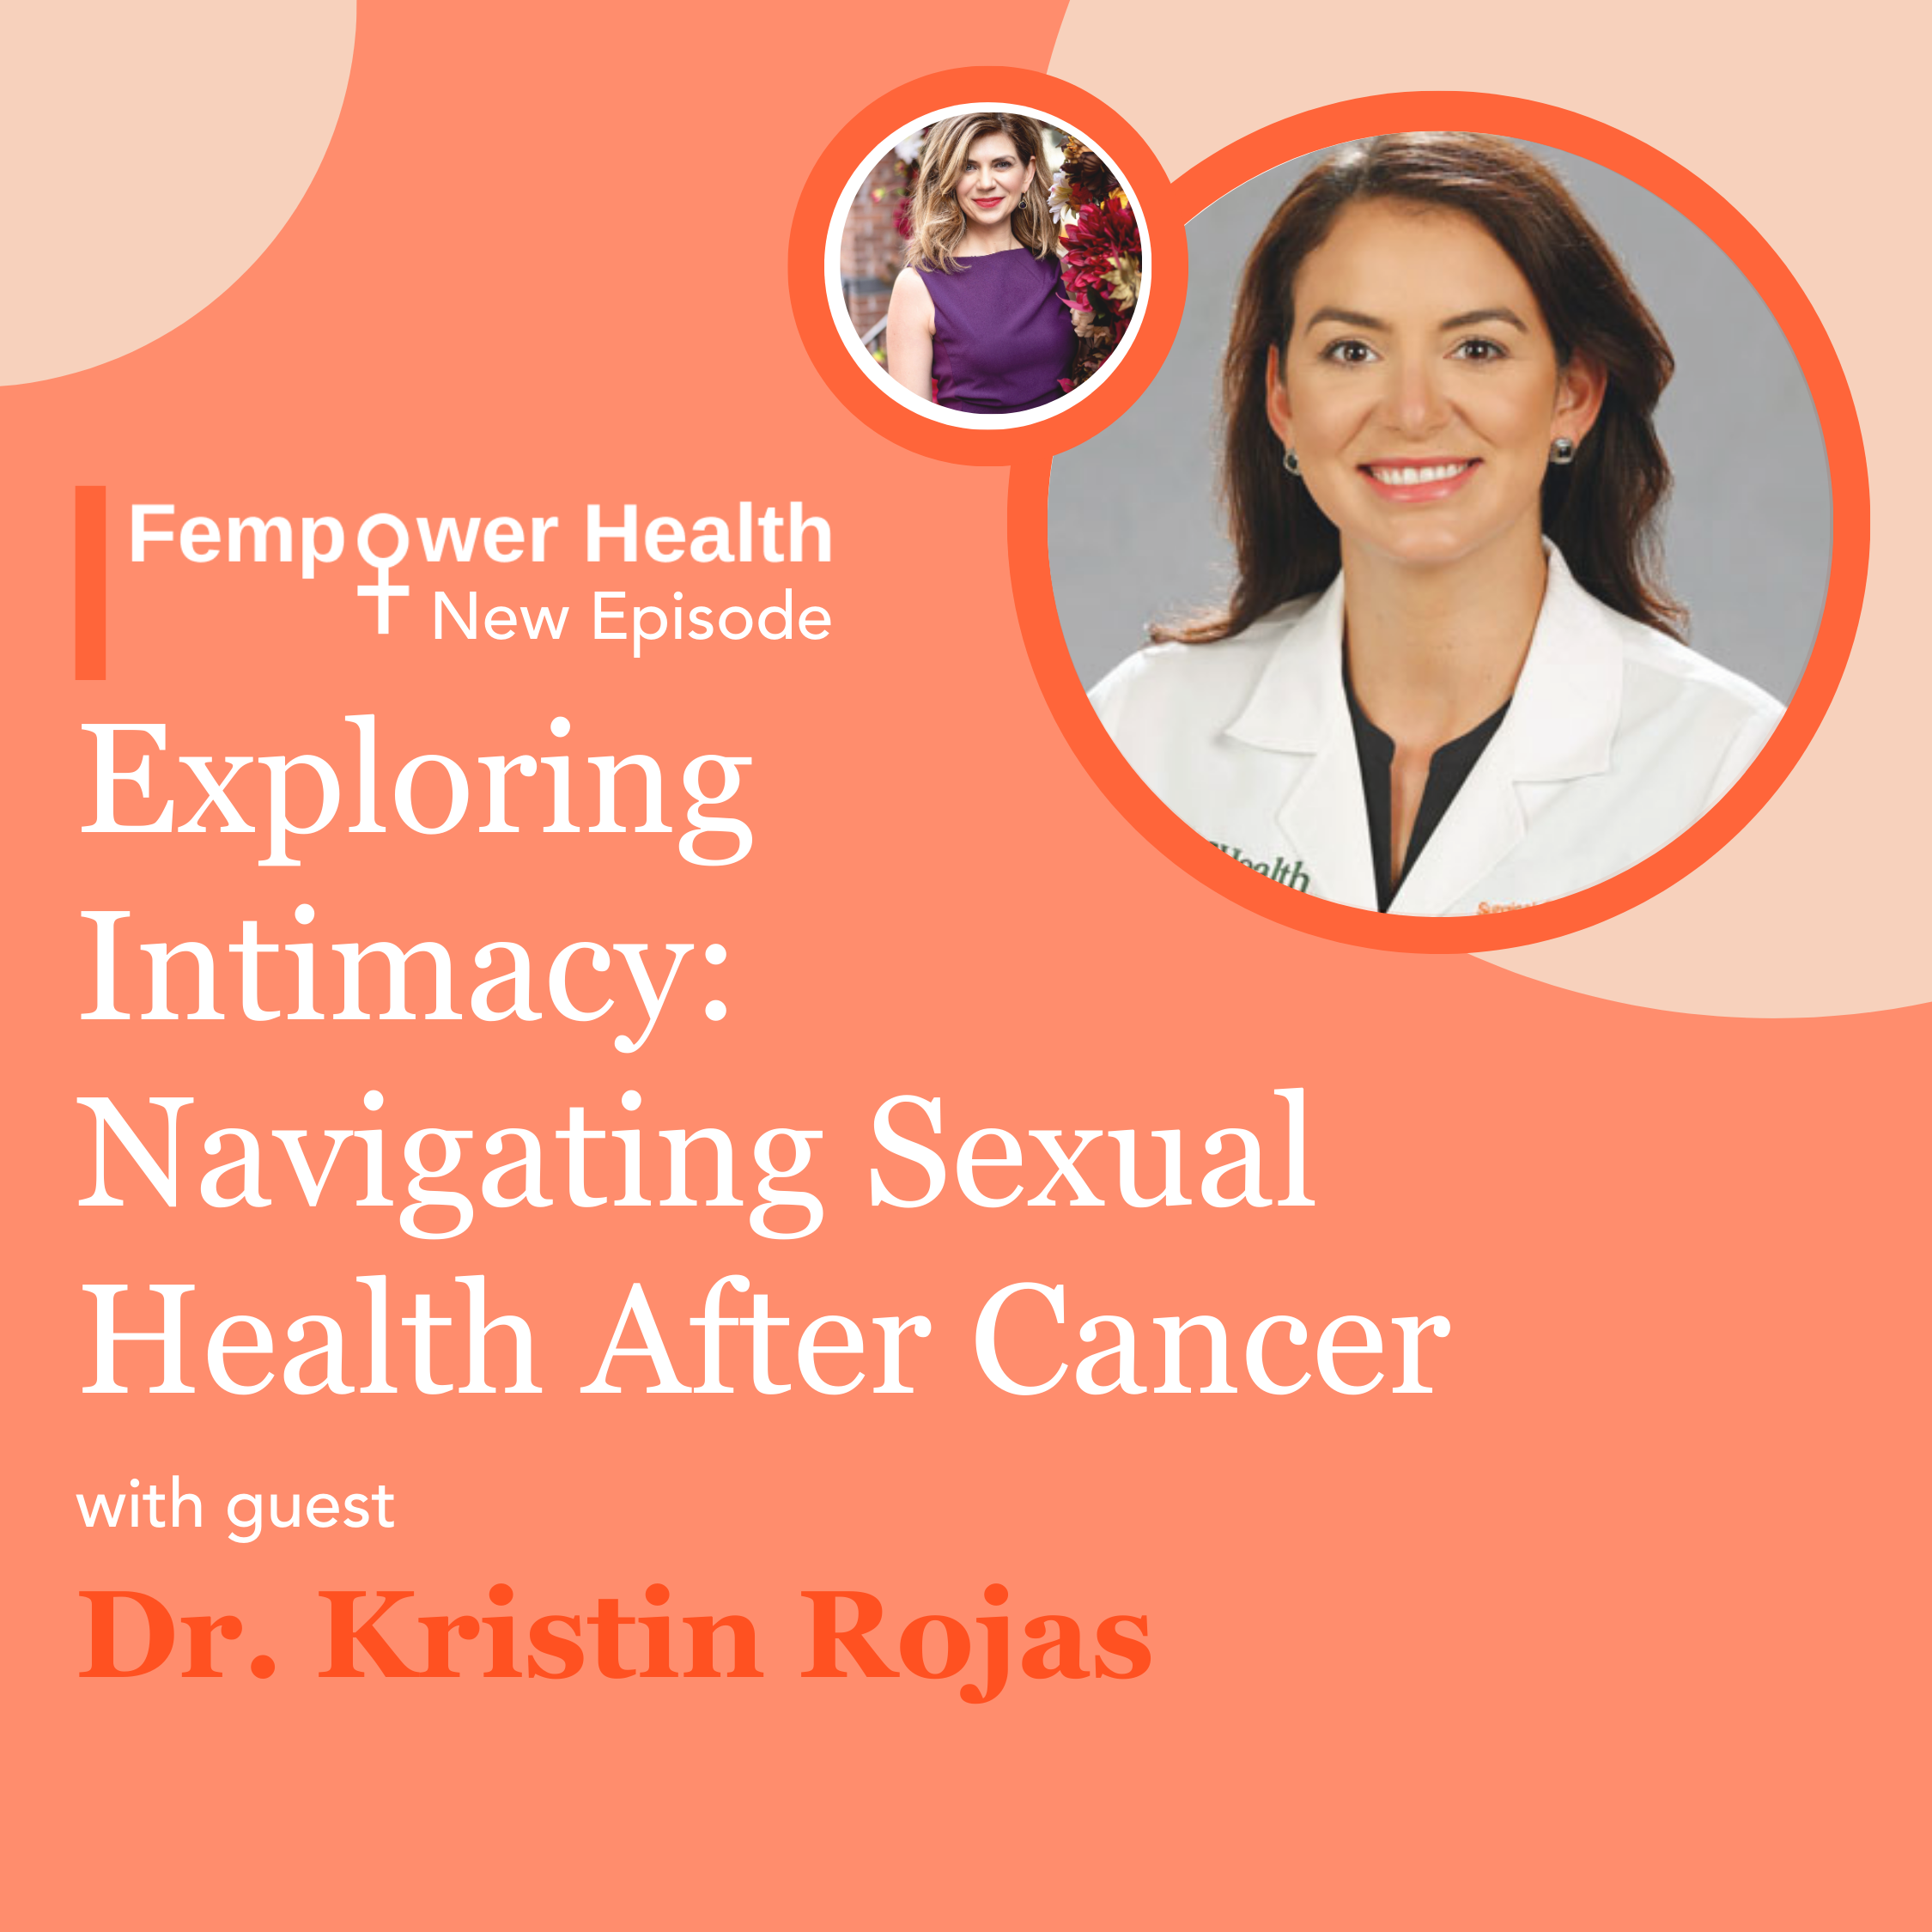 LISTEN AGAIN: Exploring Intimacy: Navigating Sexual Health After Cancer | Dr. Kristin Rojas